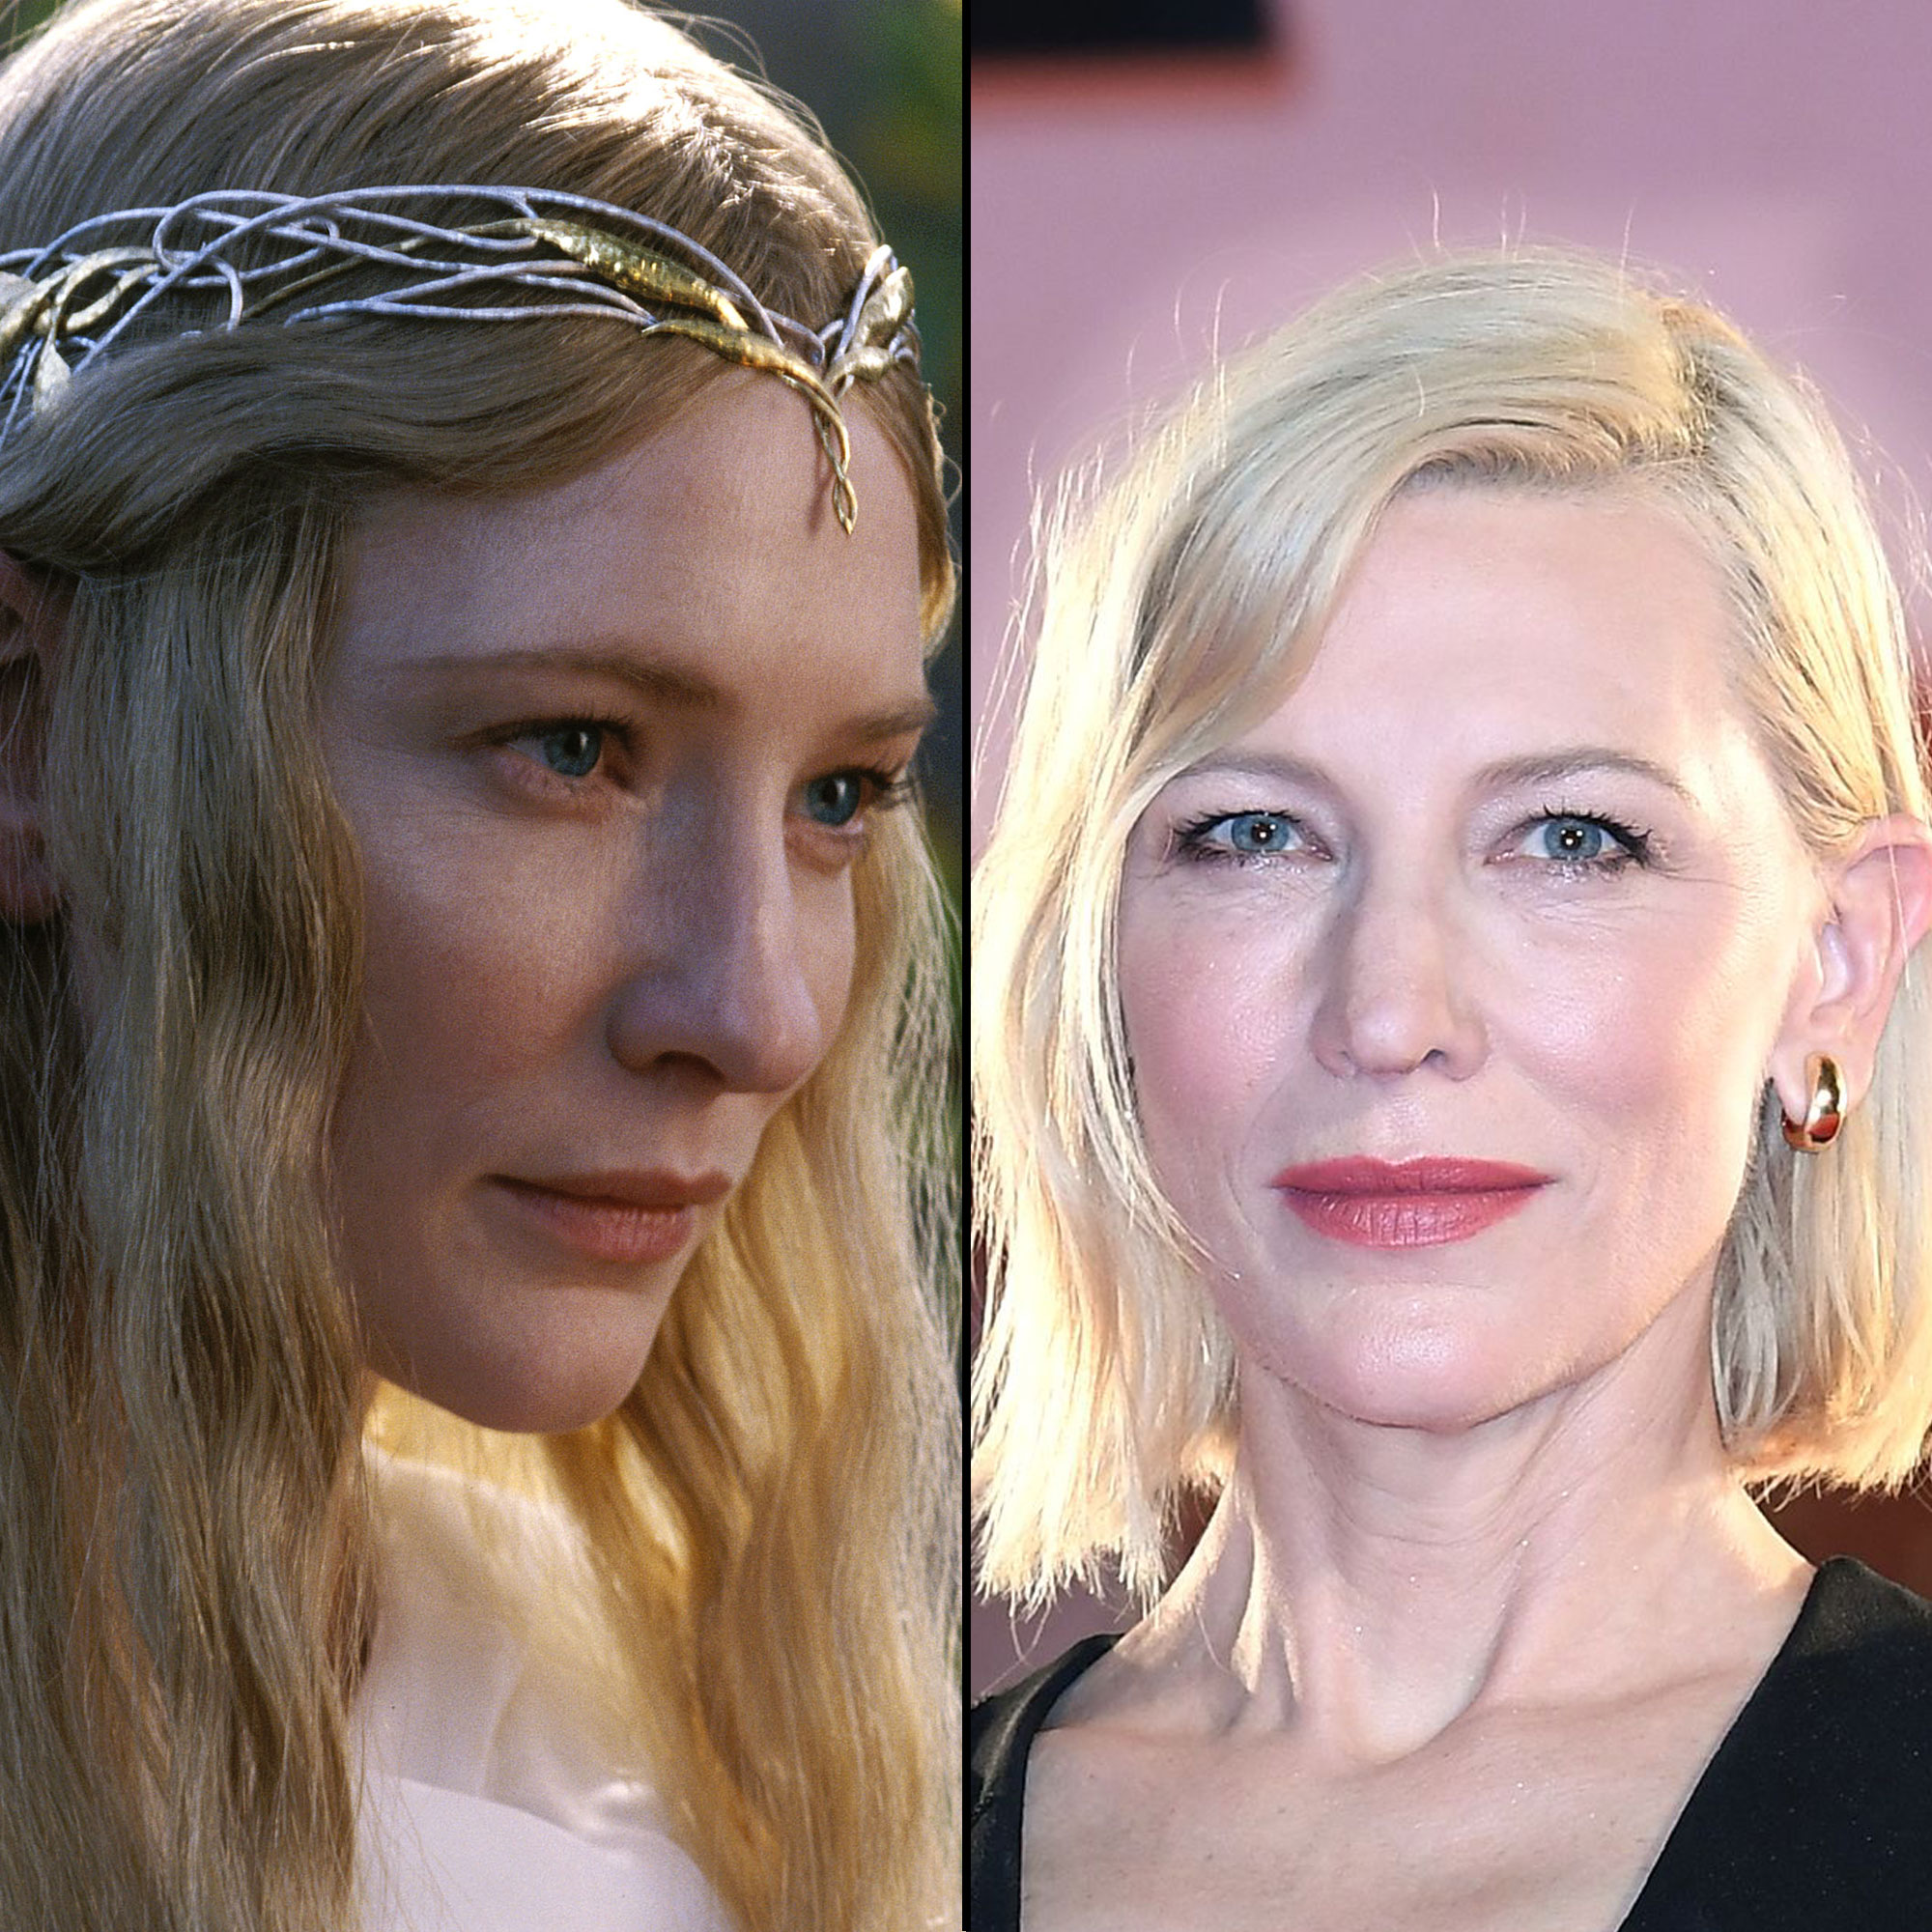 How did Cate Blanchett get cast in Lord of the Rings and The Hobbit? - Quora